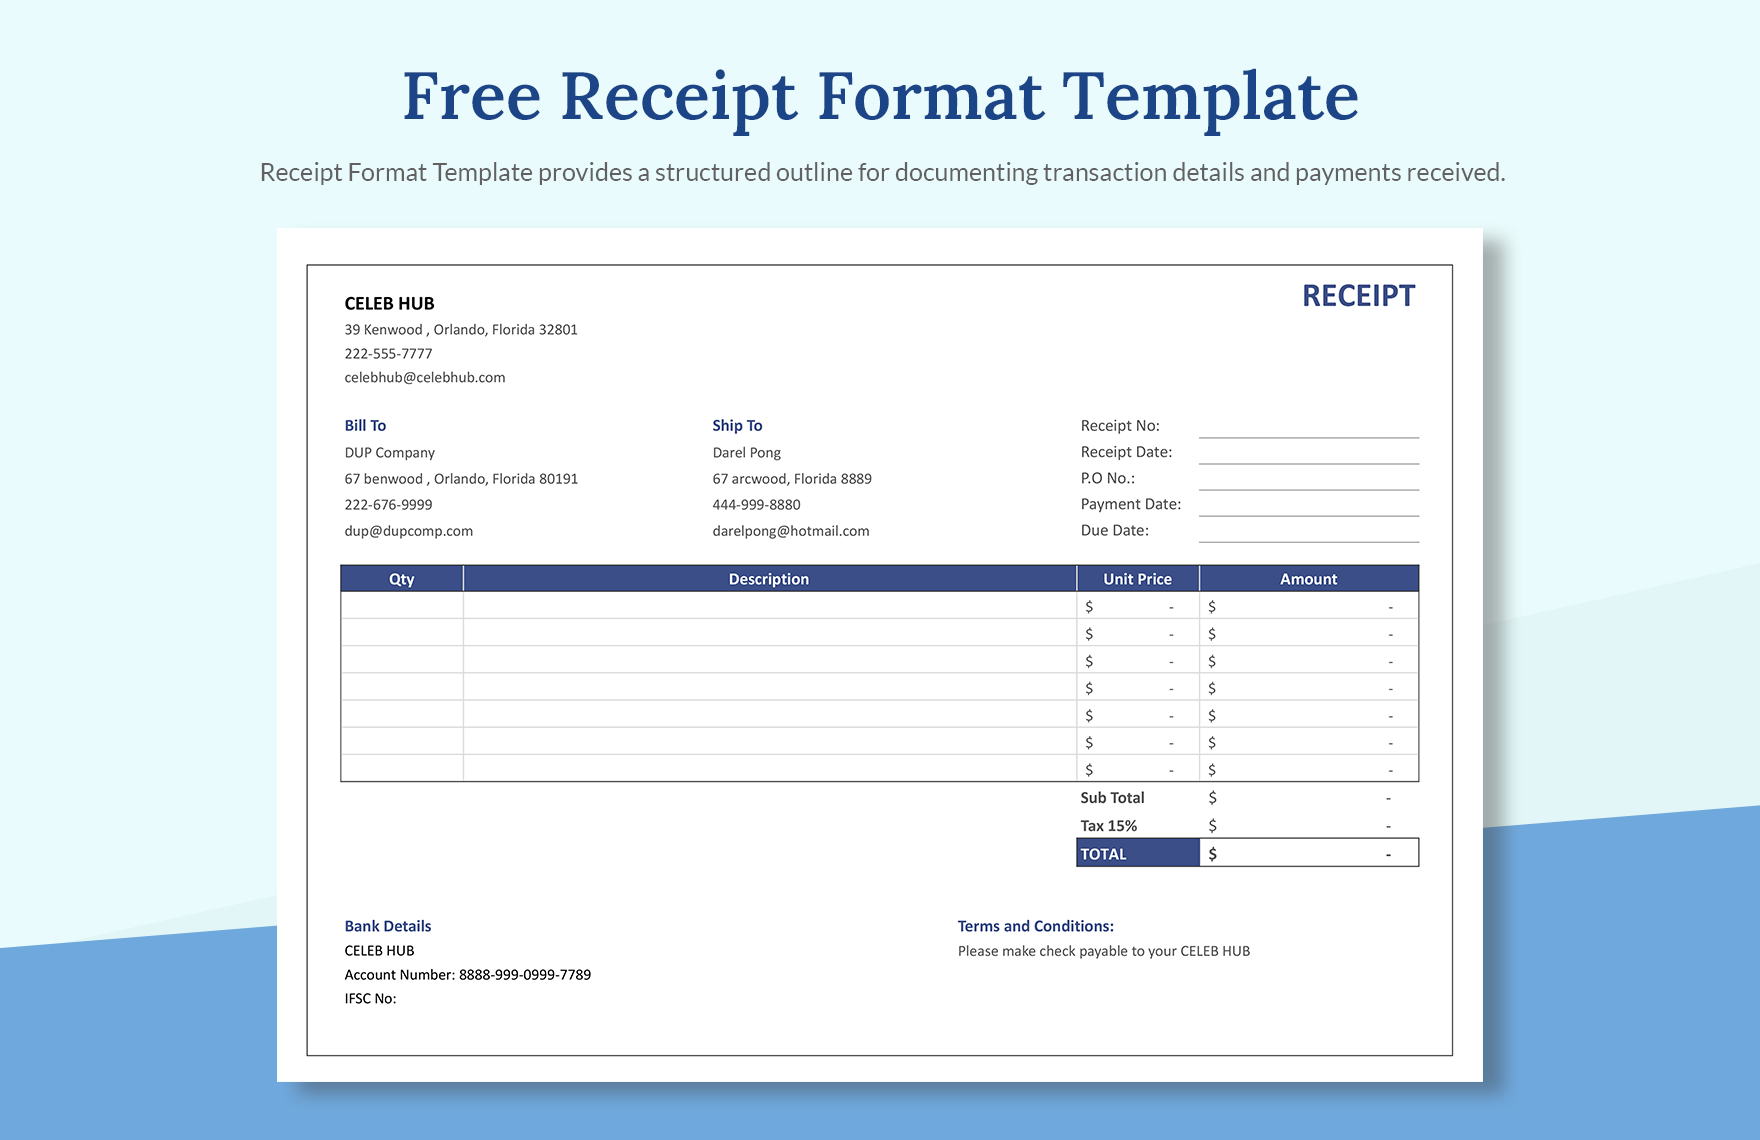 free-receipt-format-template-download-in-word-google-docs-excel